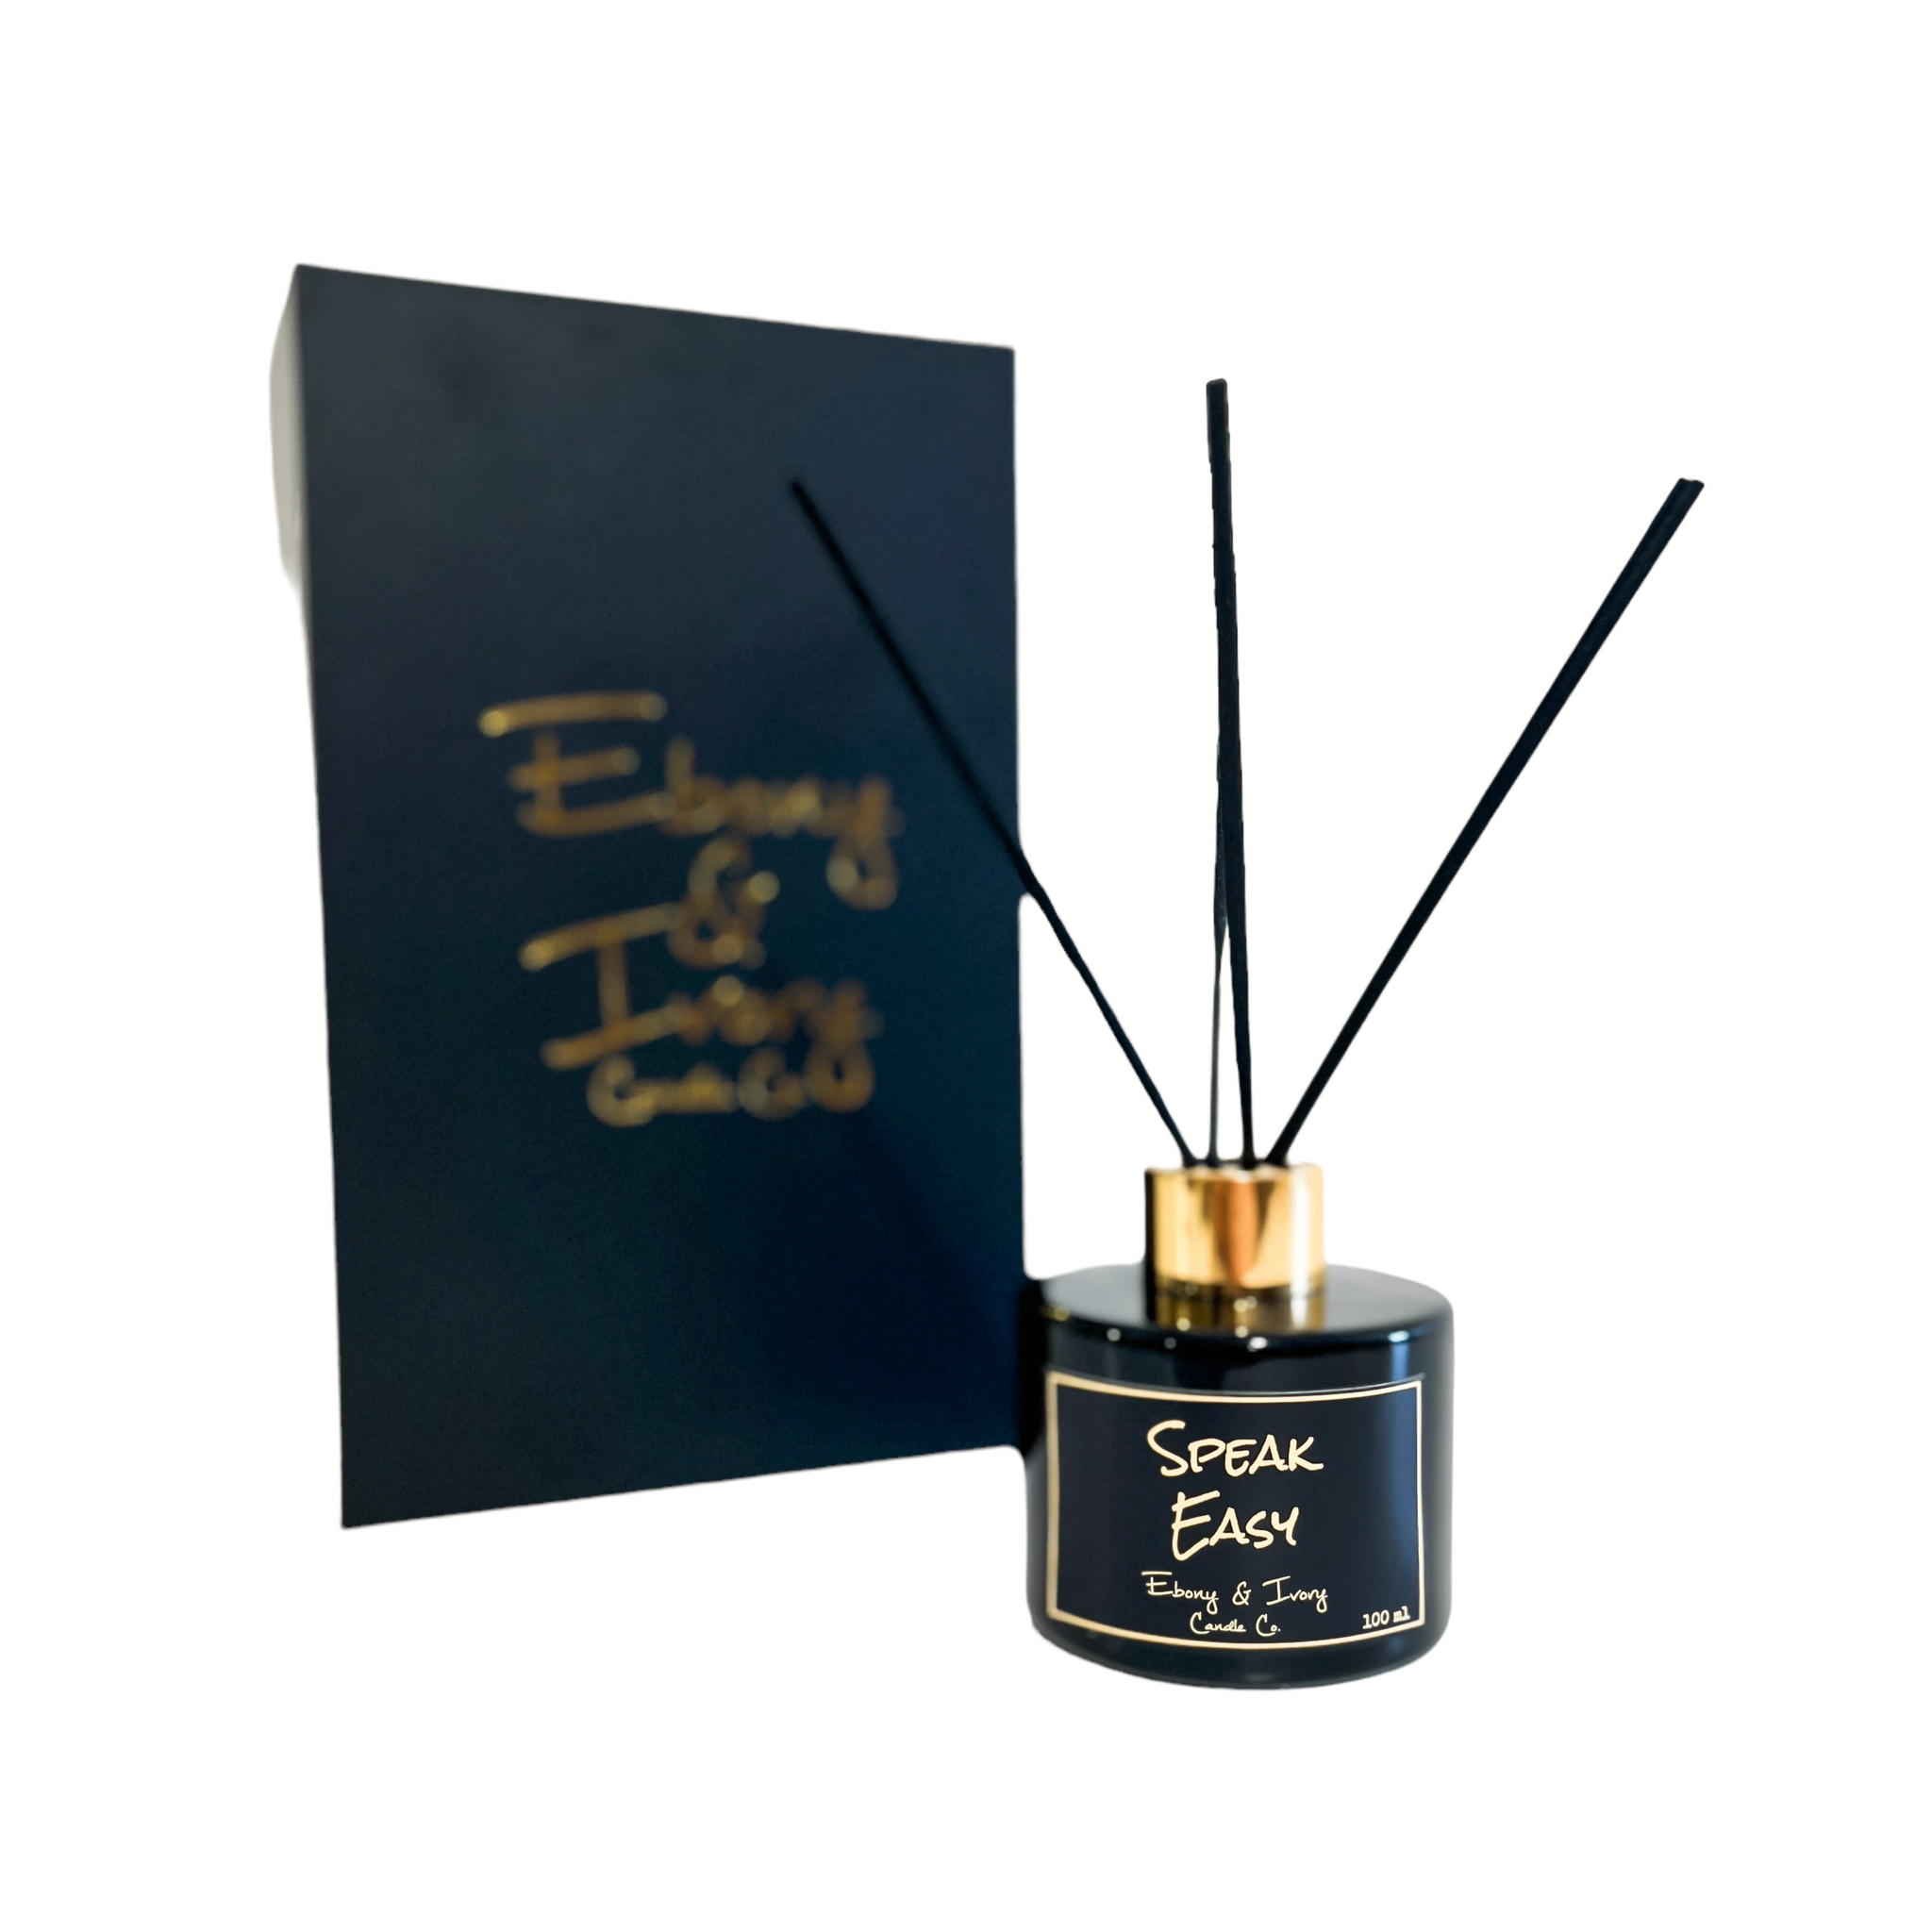 Black, one hundred milliliter, tobacco and vanilla scented reed diffuser with a gold lid and a black label that reads Speak Easy